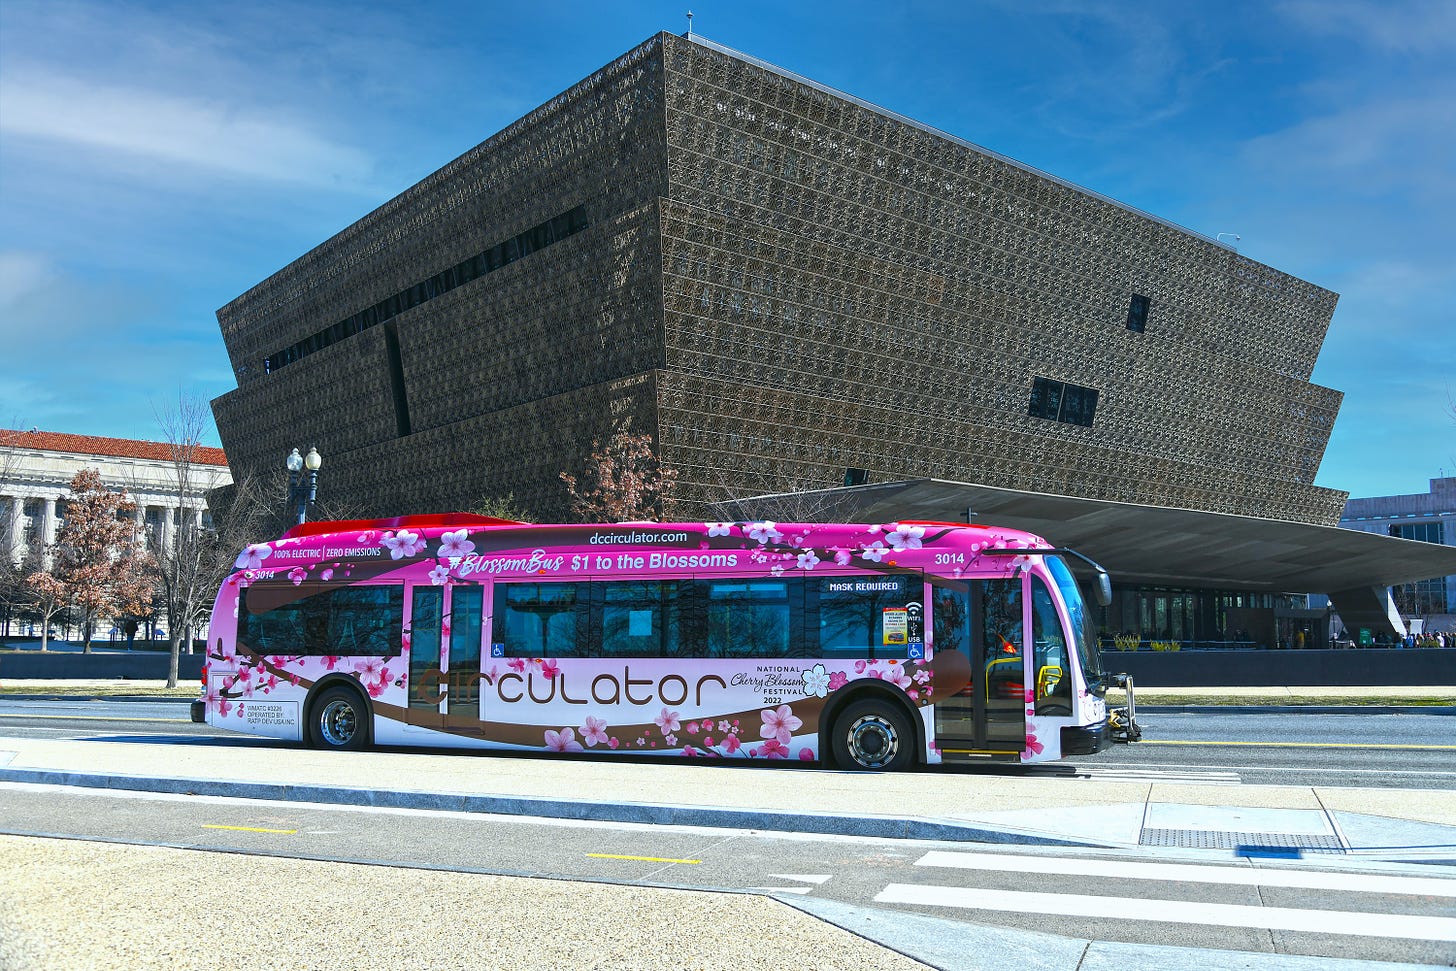 DC Circulator Cherry Blossom bus in front of the National Museum of African American History and Culture